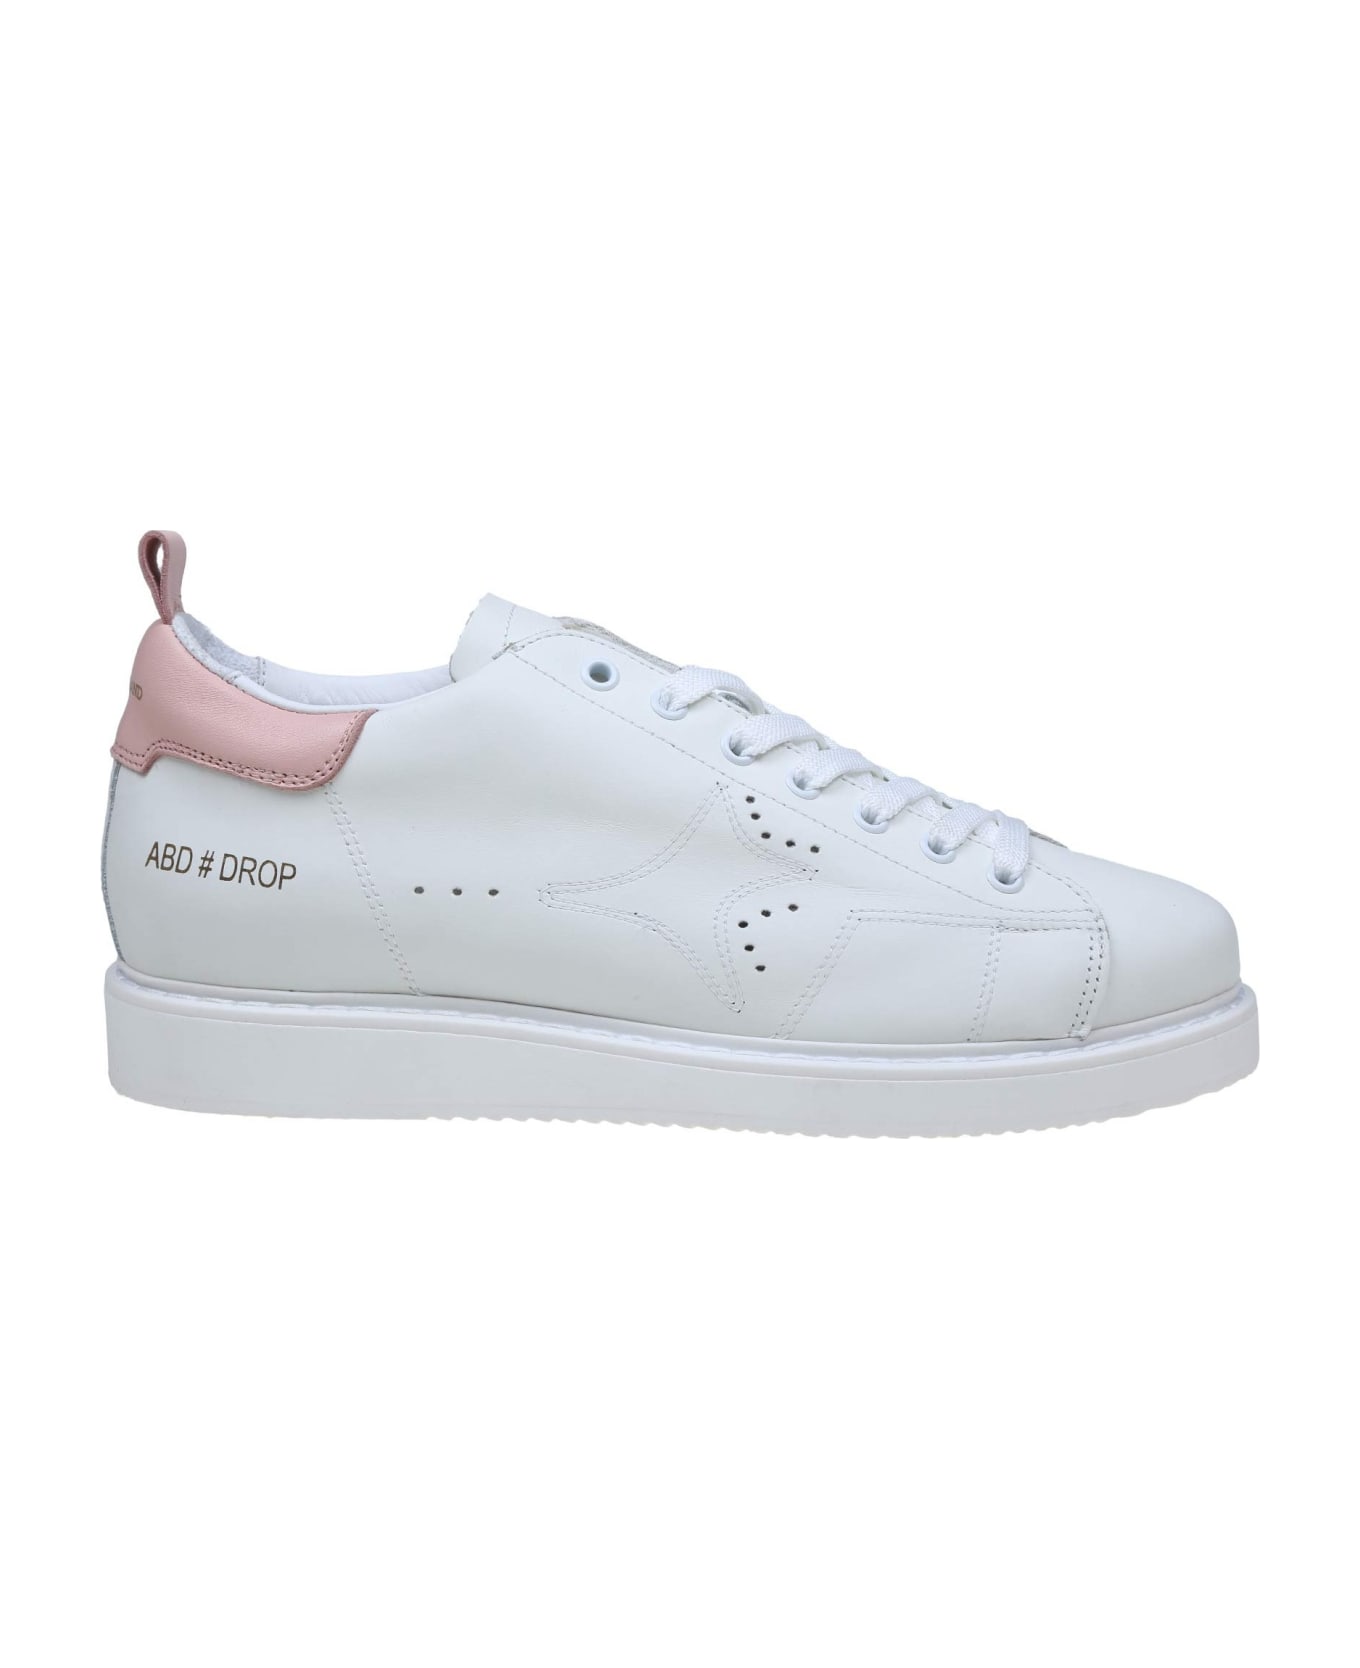 AMA-BRAND White And Pink Leather Sneakers - WHITE/PINK